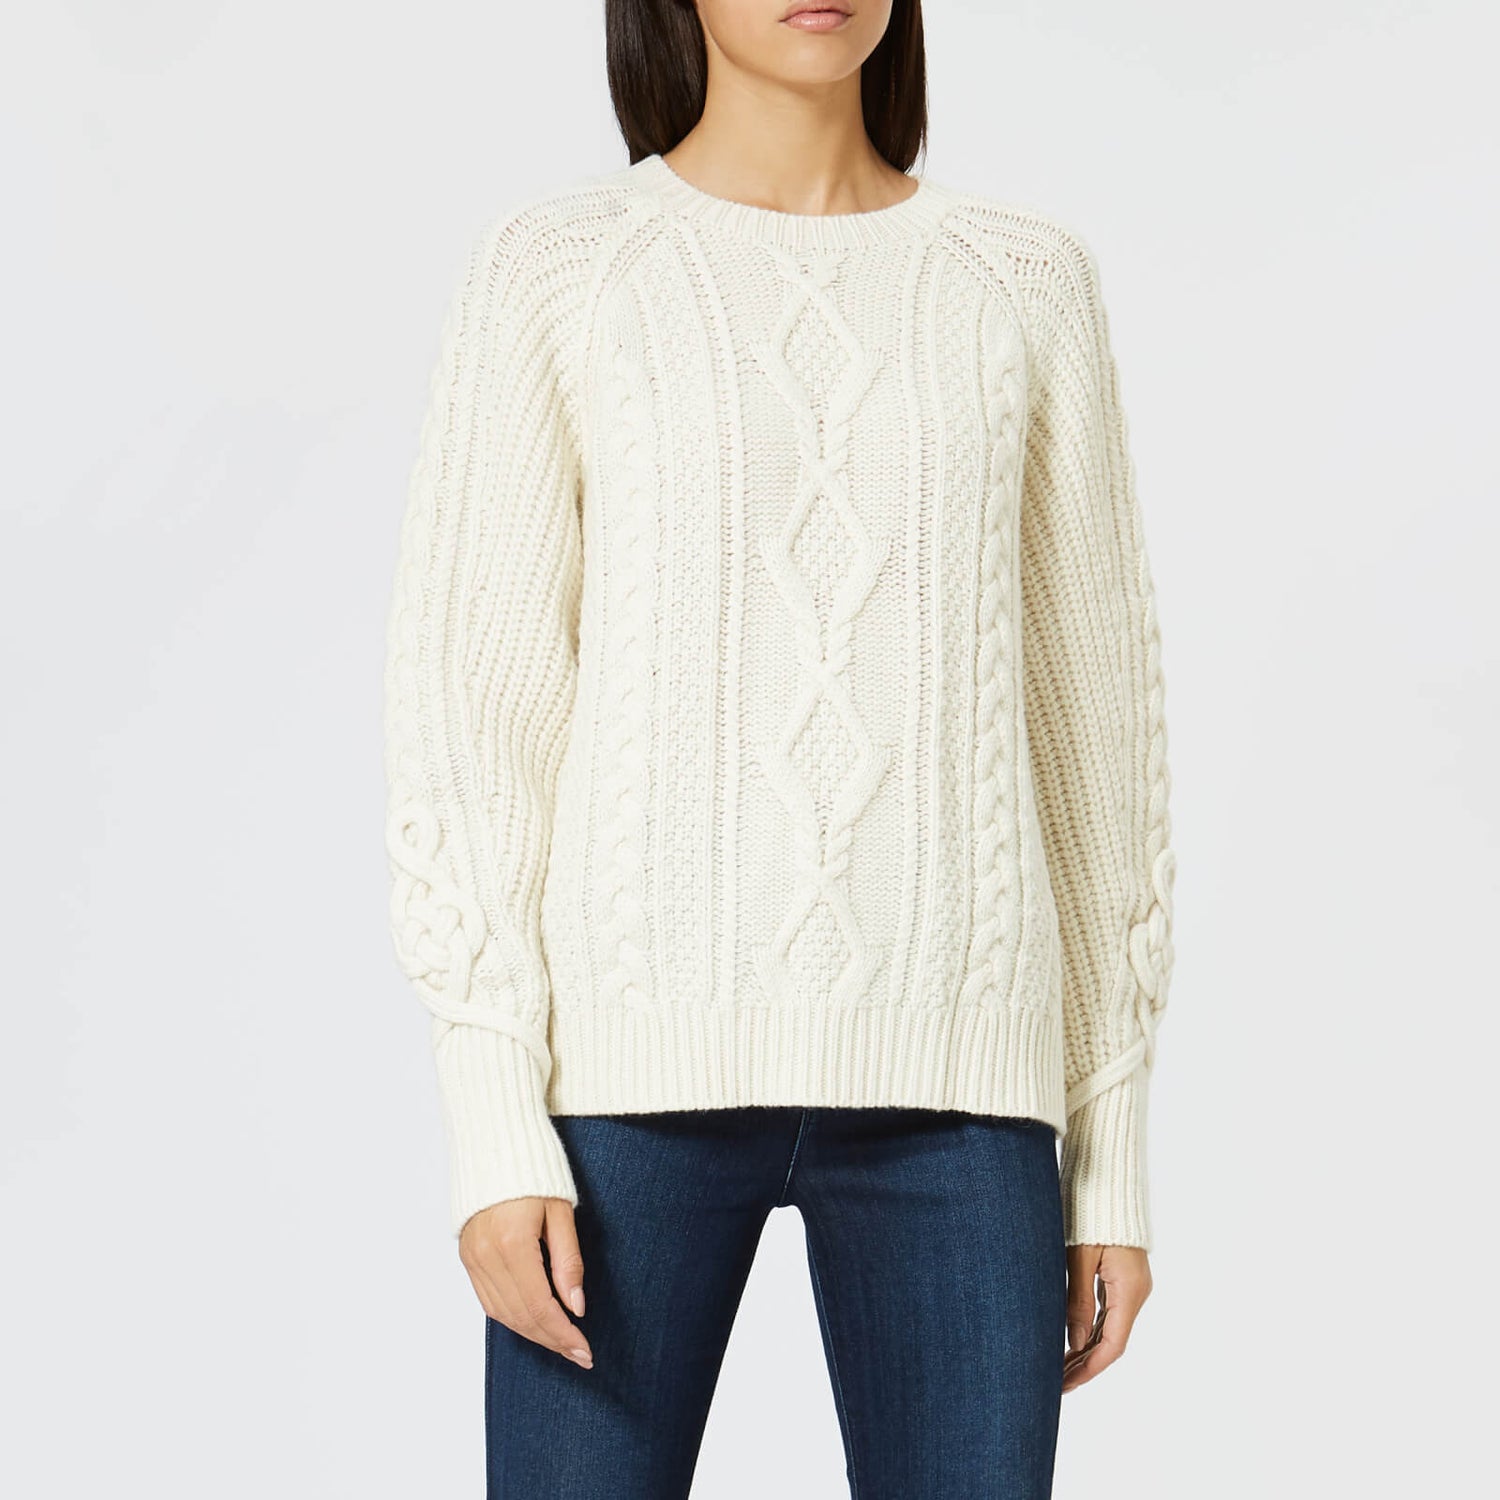 Polo Ralph Lauren Women's Chunky Cable Knit Jumper - Cream - Free UK ...